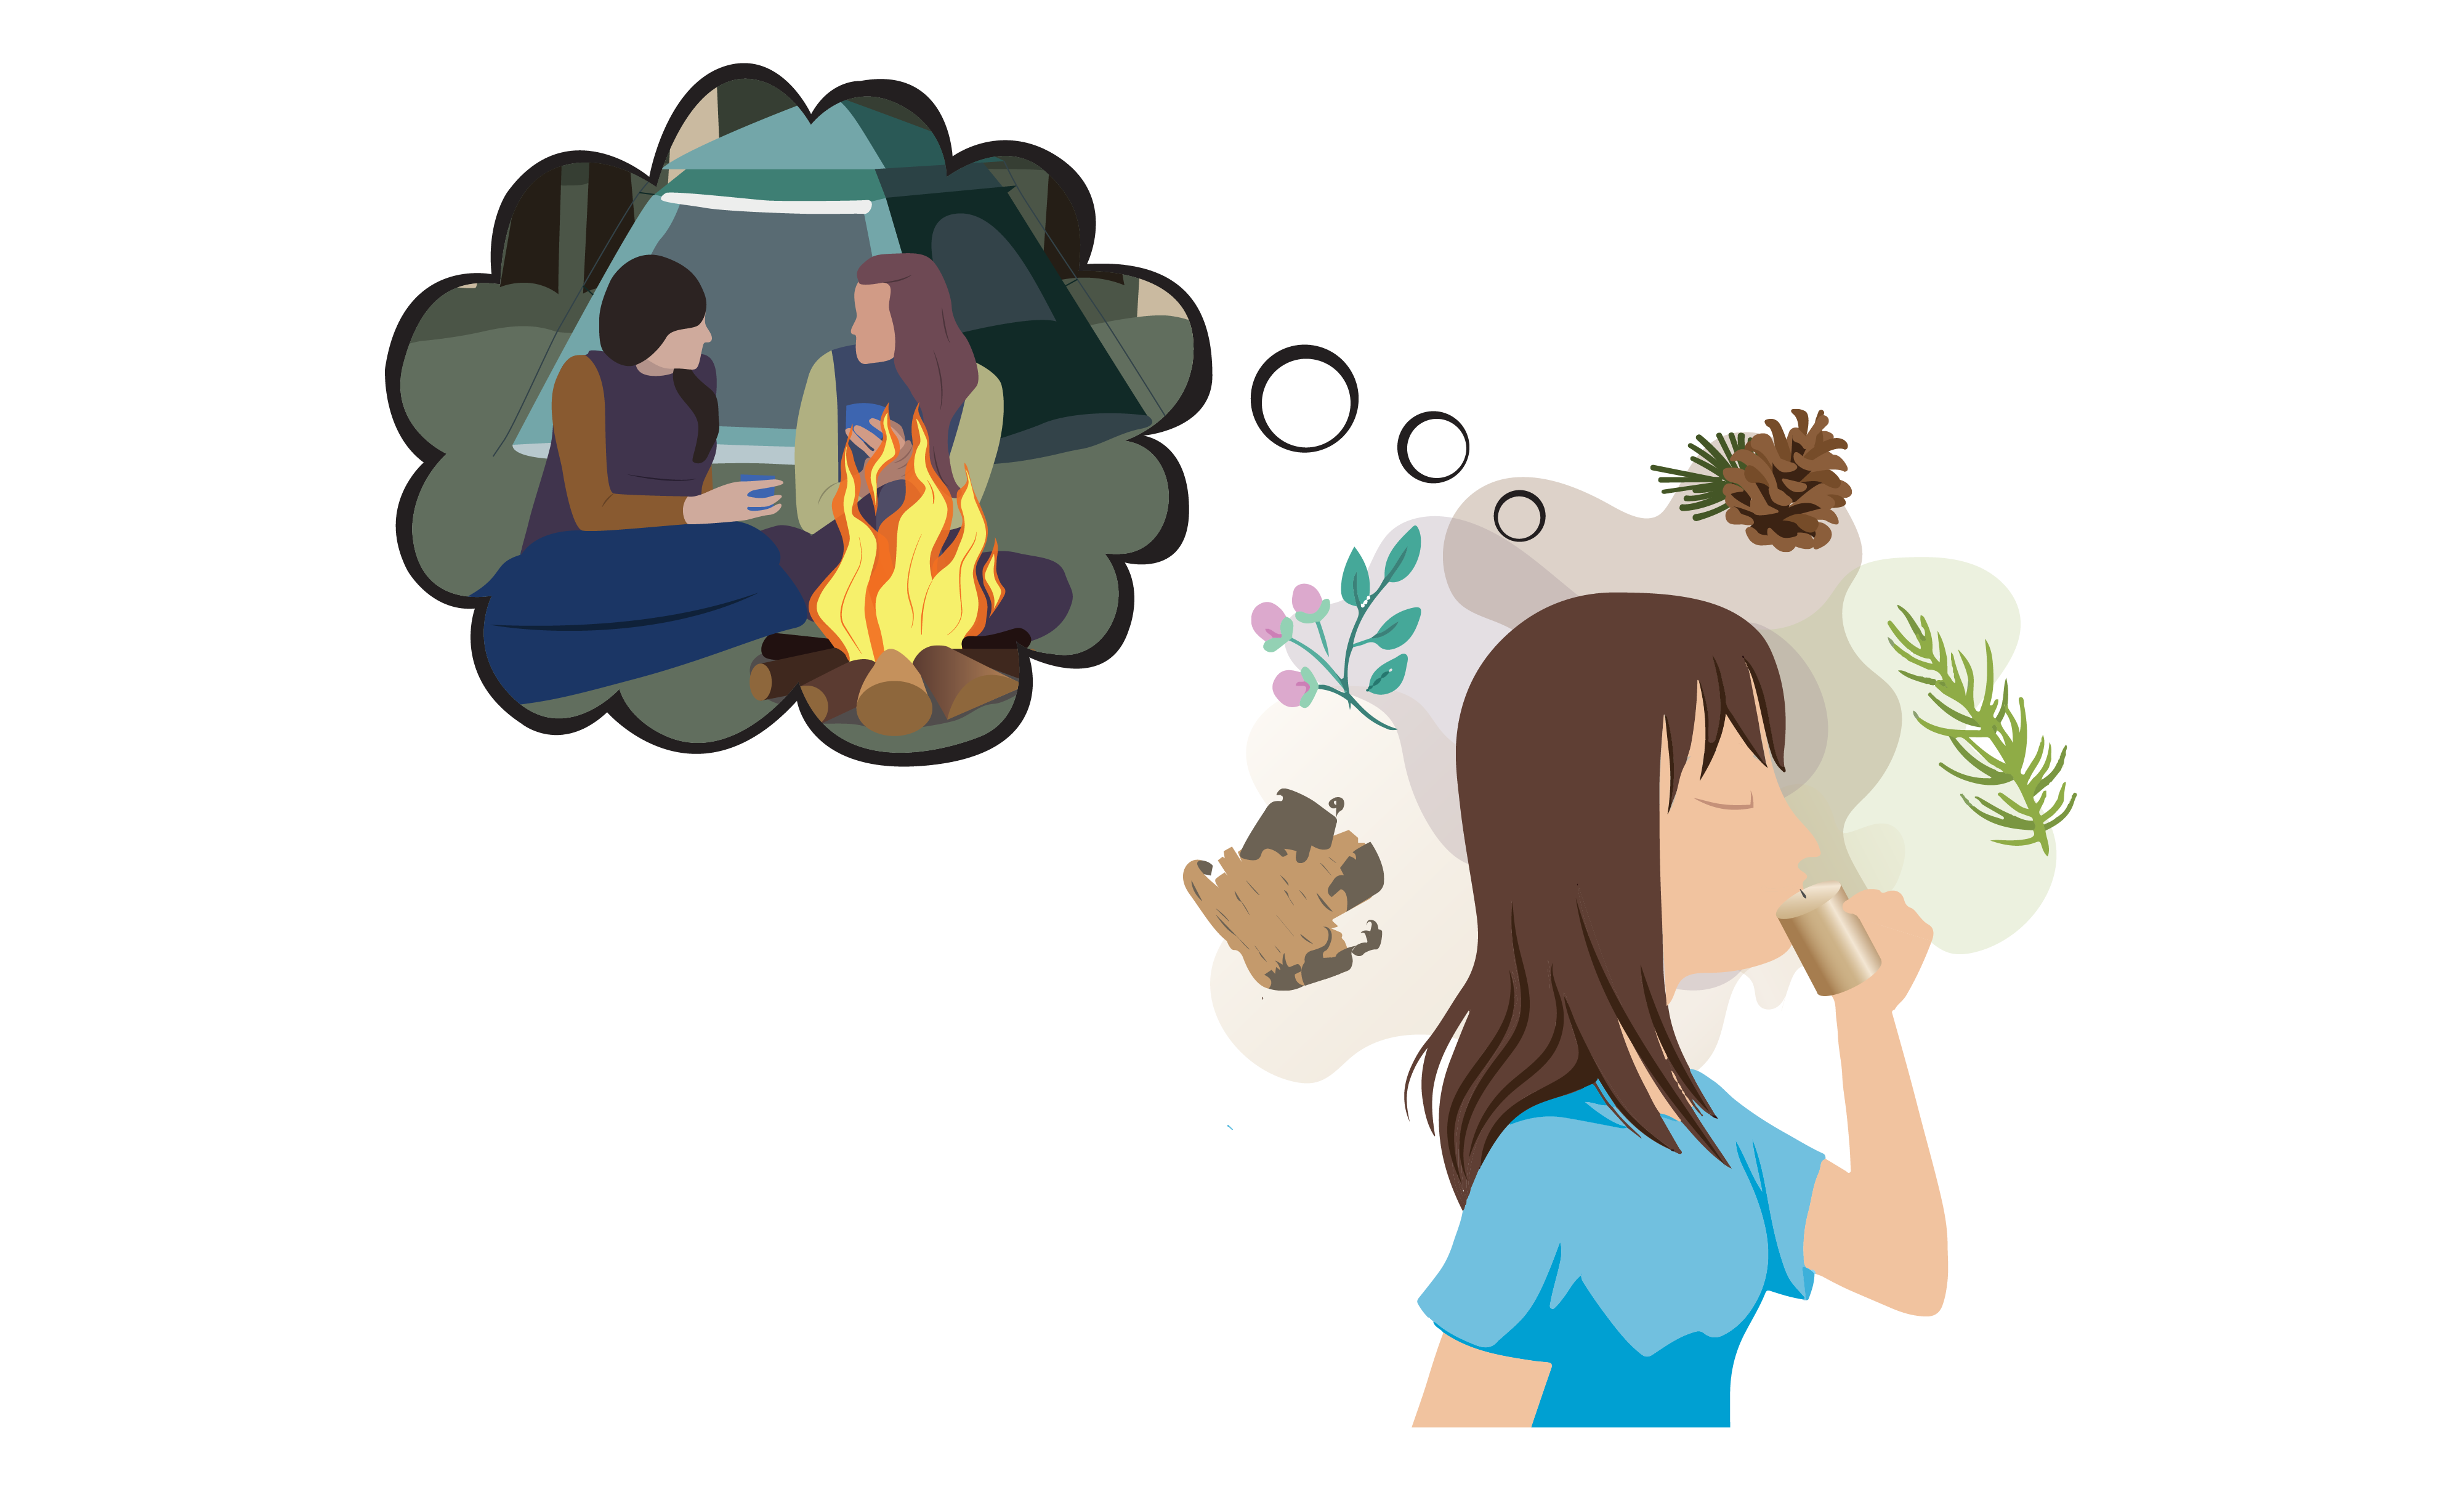 A person in a blue shirt smells a candle. Icons of branches, flowers, a pinecone, and wood surround her head. A thought bubble shows two people sitting in front of campfire and a tent, drinking from cups.